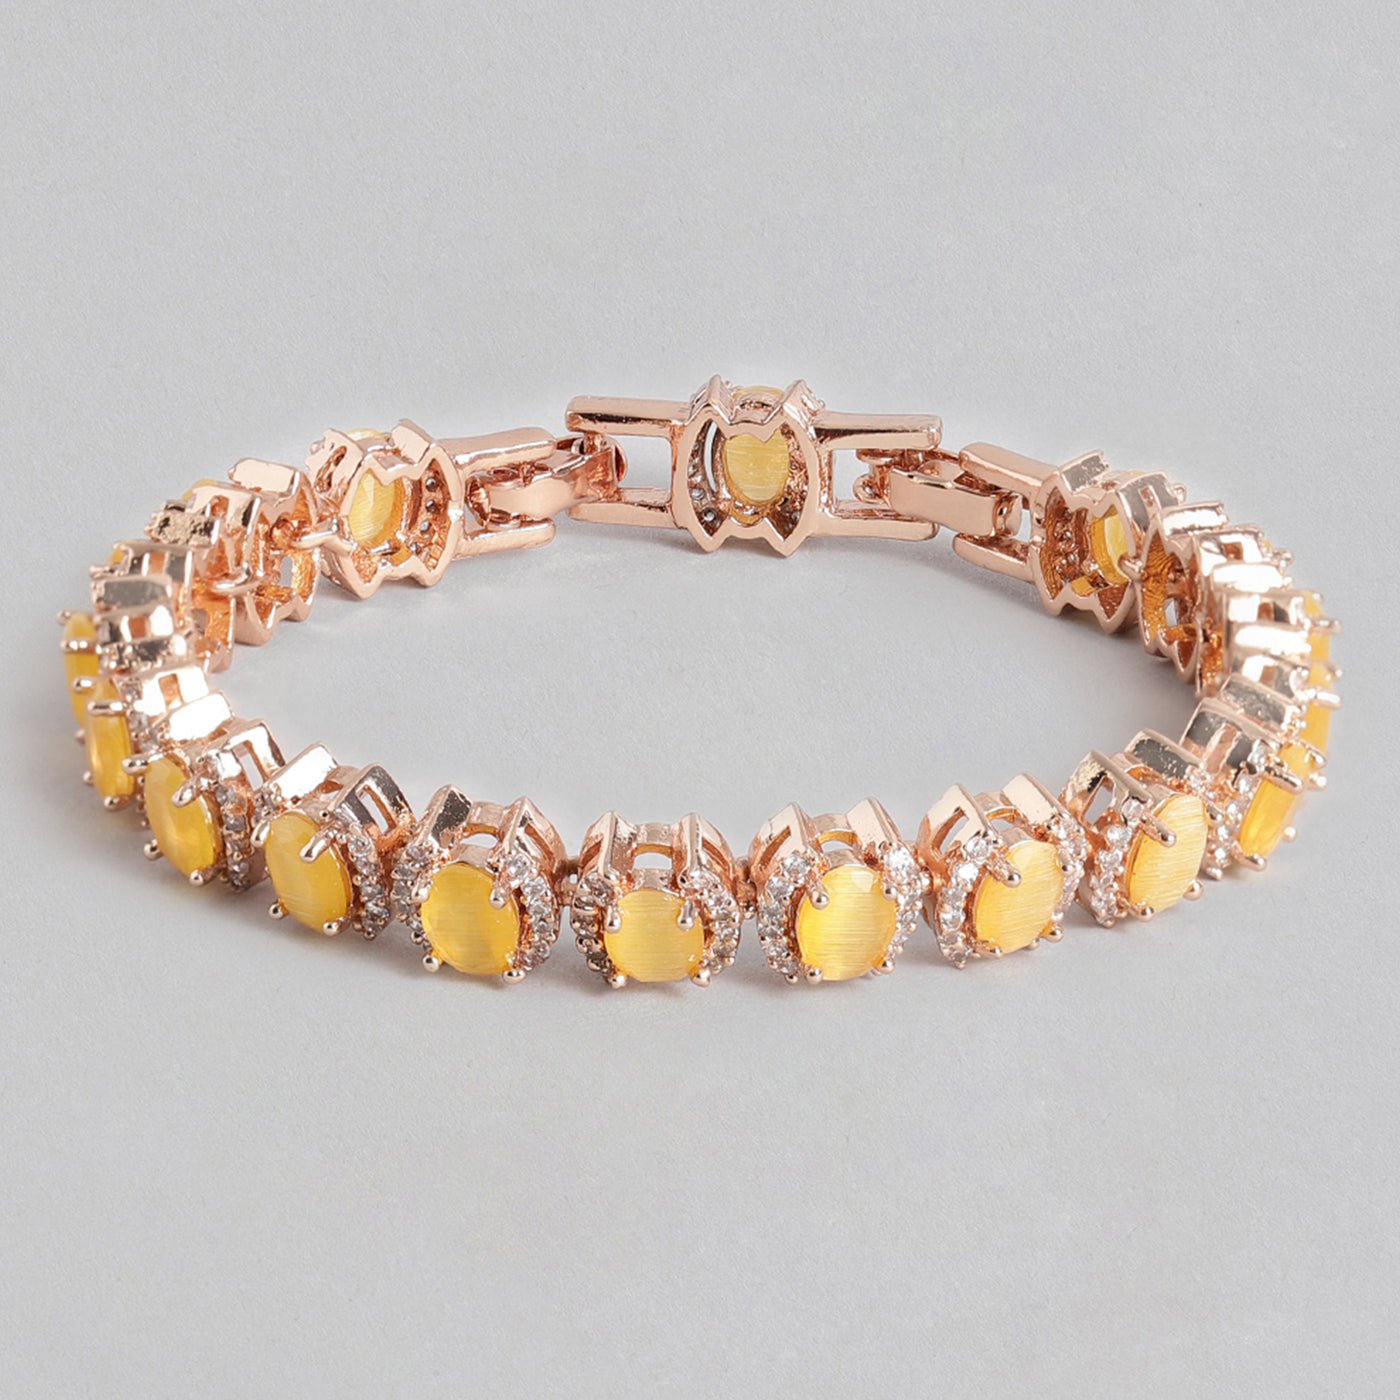 Estele Rose Gold Plated CZ Fascinating Designer Bracelet with Mint yellow Stones for Girls/Women